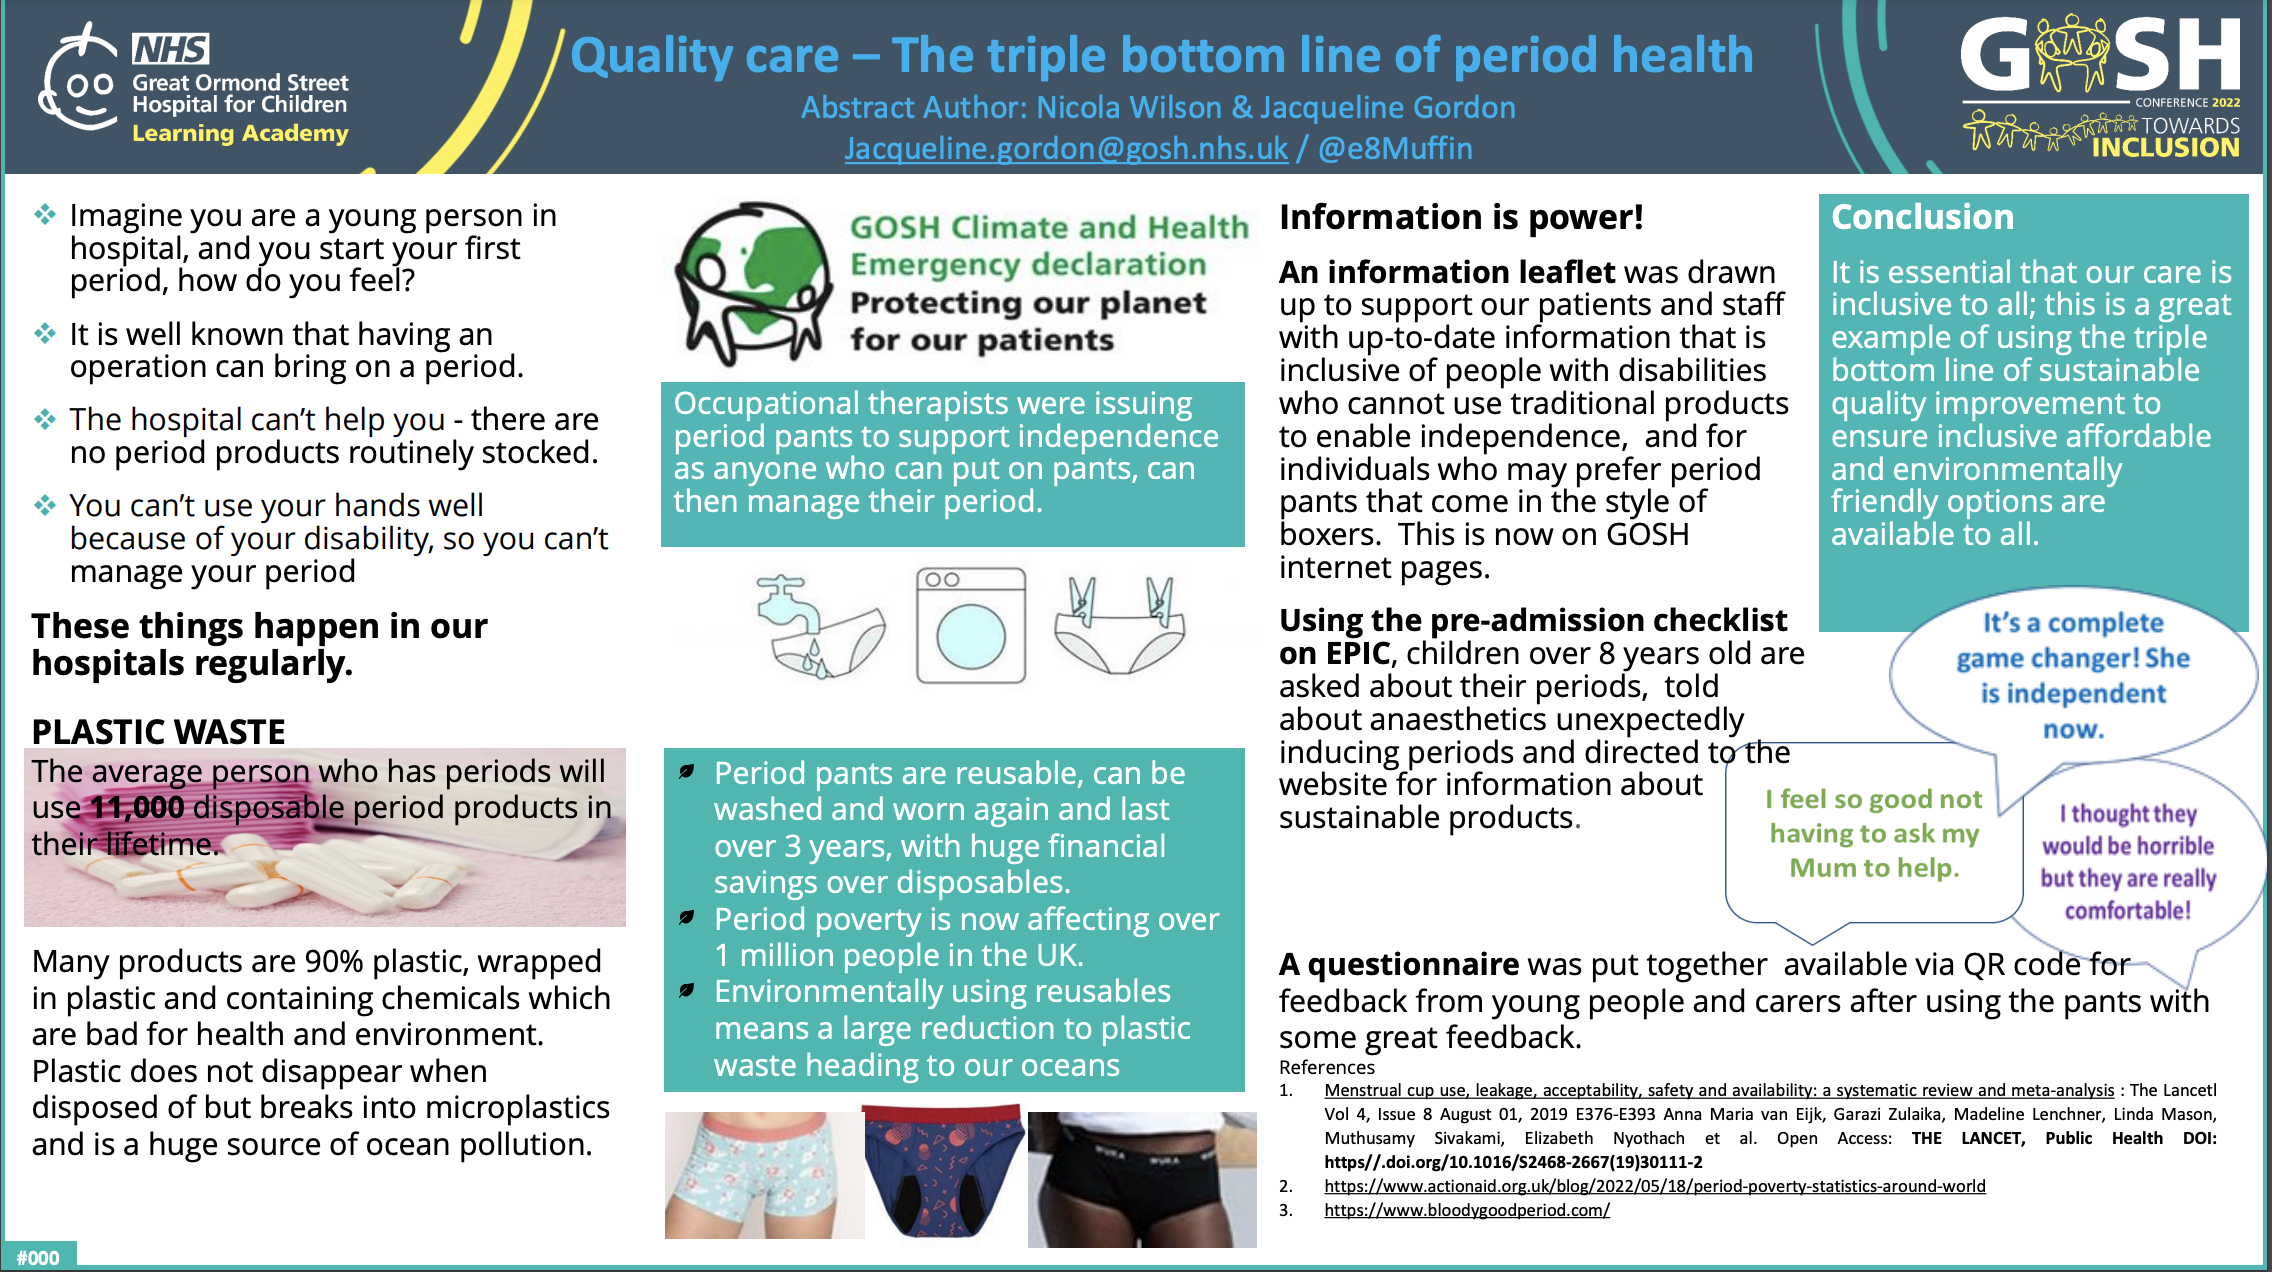 The triple bottom line of period health featured image